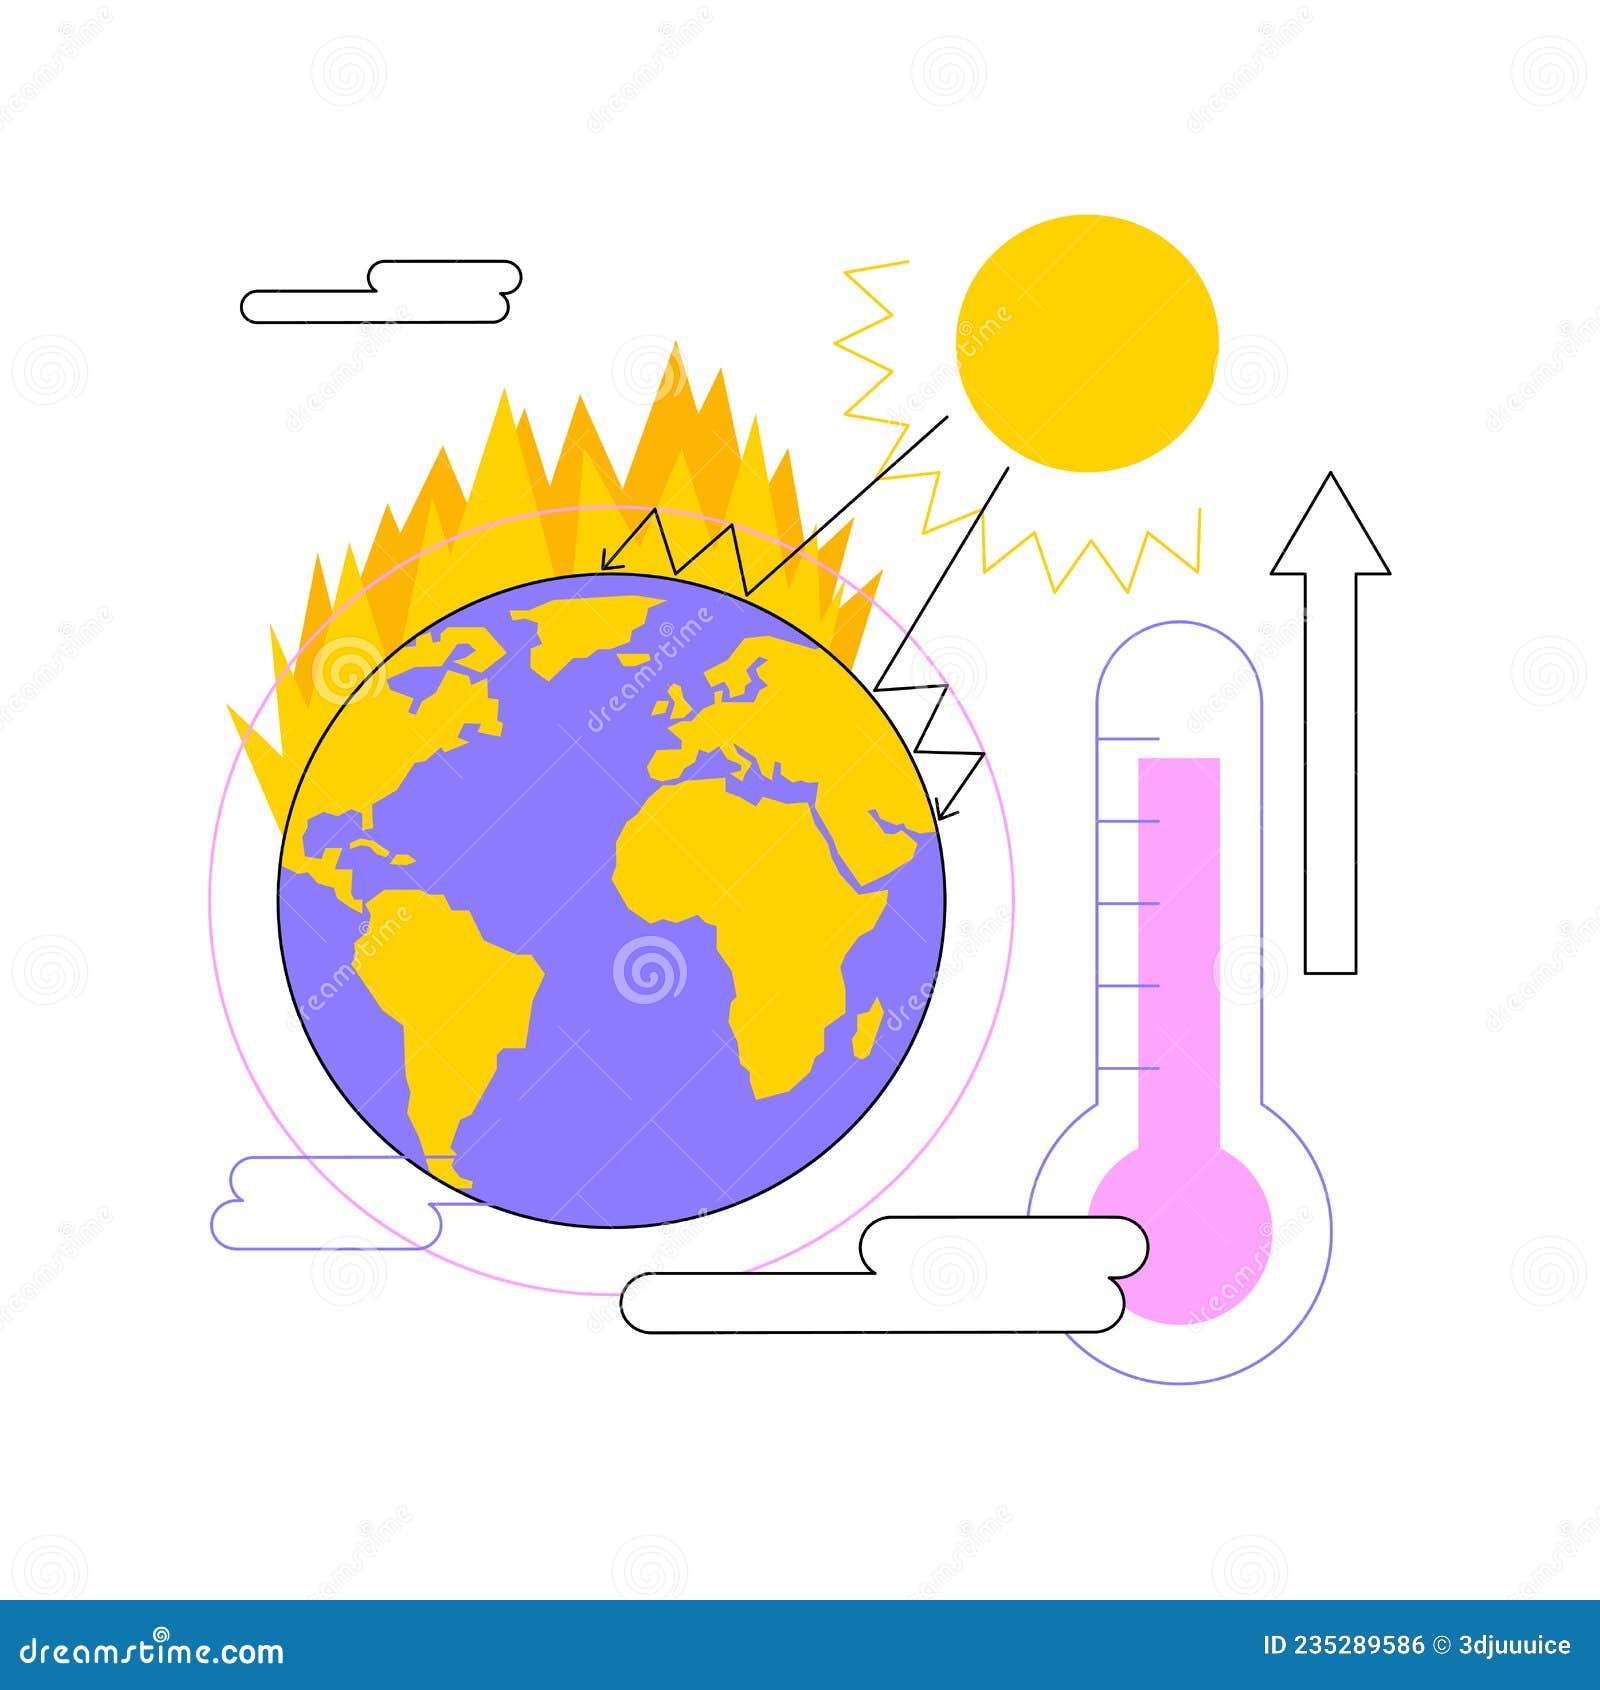 Greenhouse Effect Abstract Concept Vector Illustration Stock Vector Illustration Of Rise Geometric